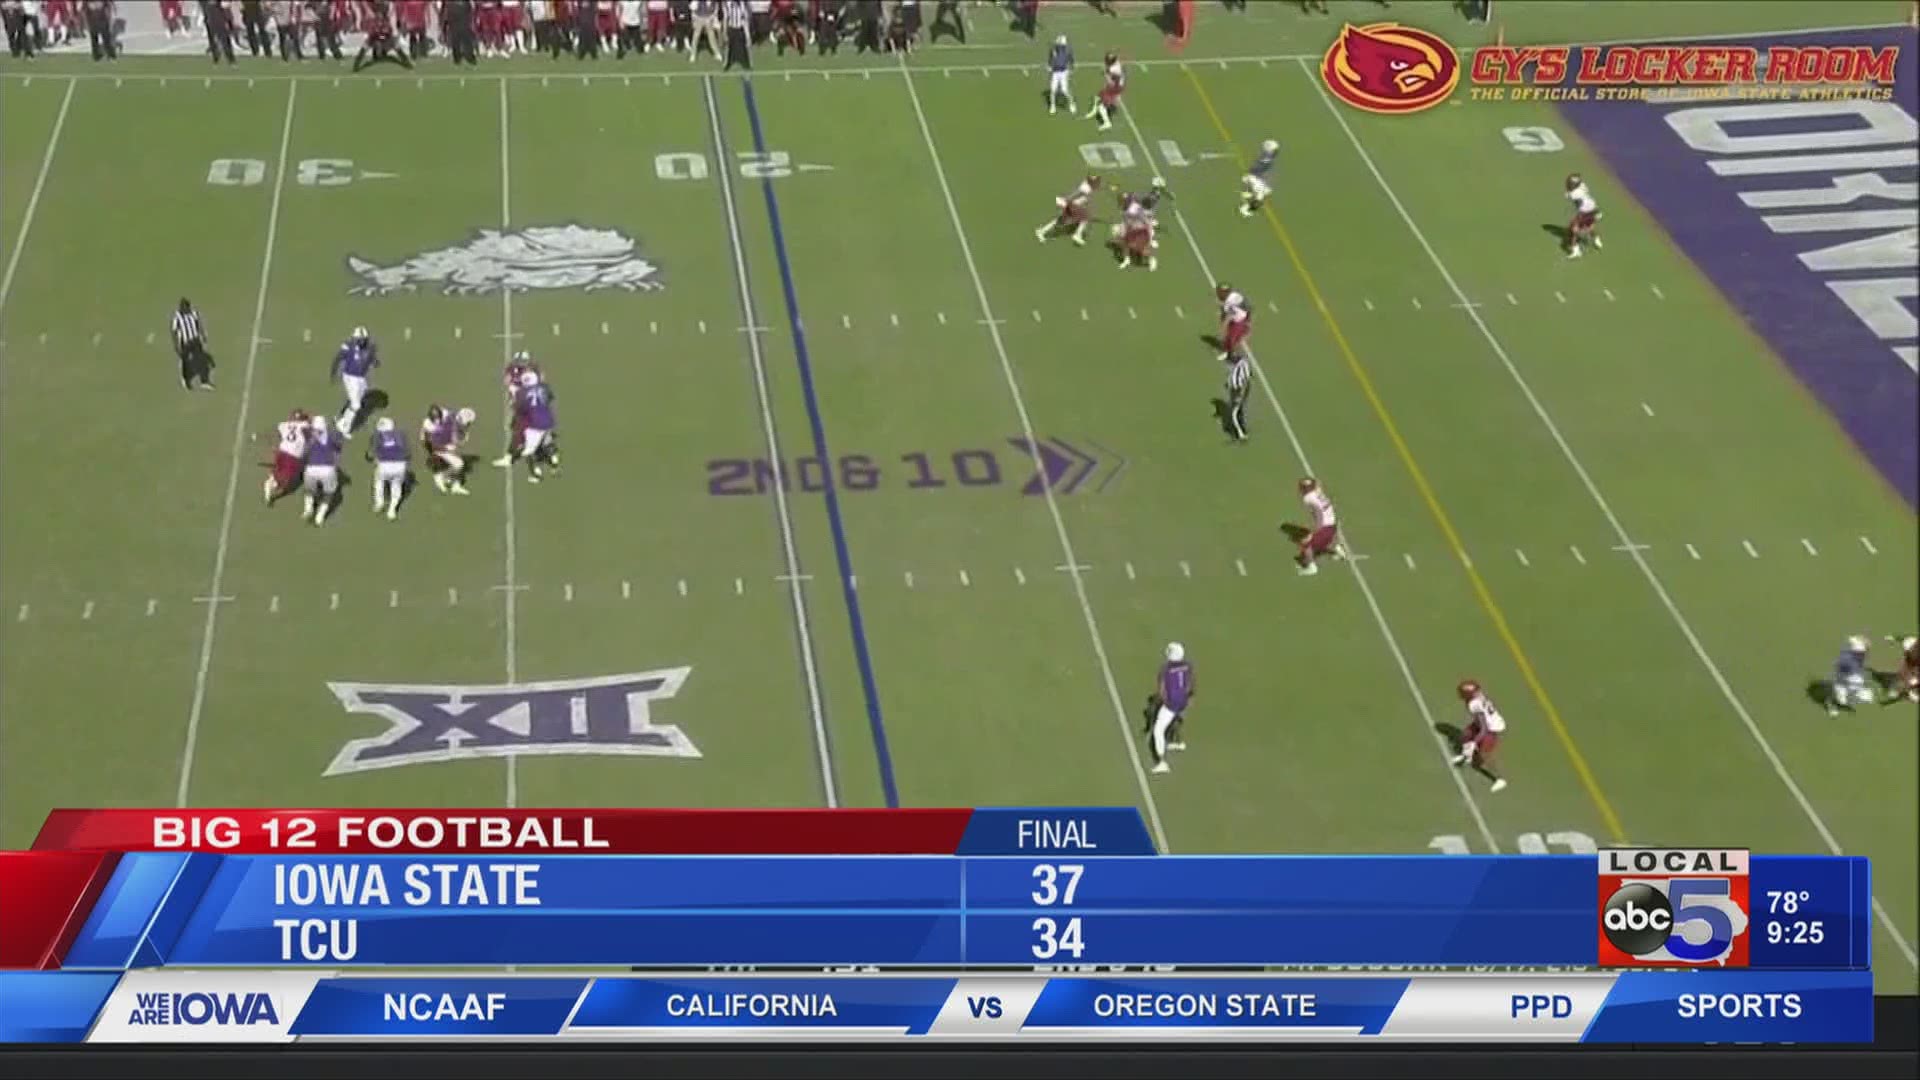 Iowa State earned their first win of the season against TCU, behind 155 yards and 3 TDs on the ground from Breece Hall.